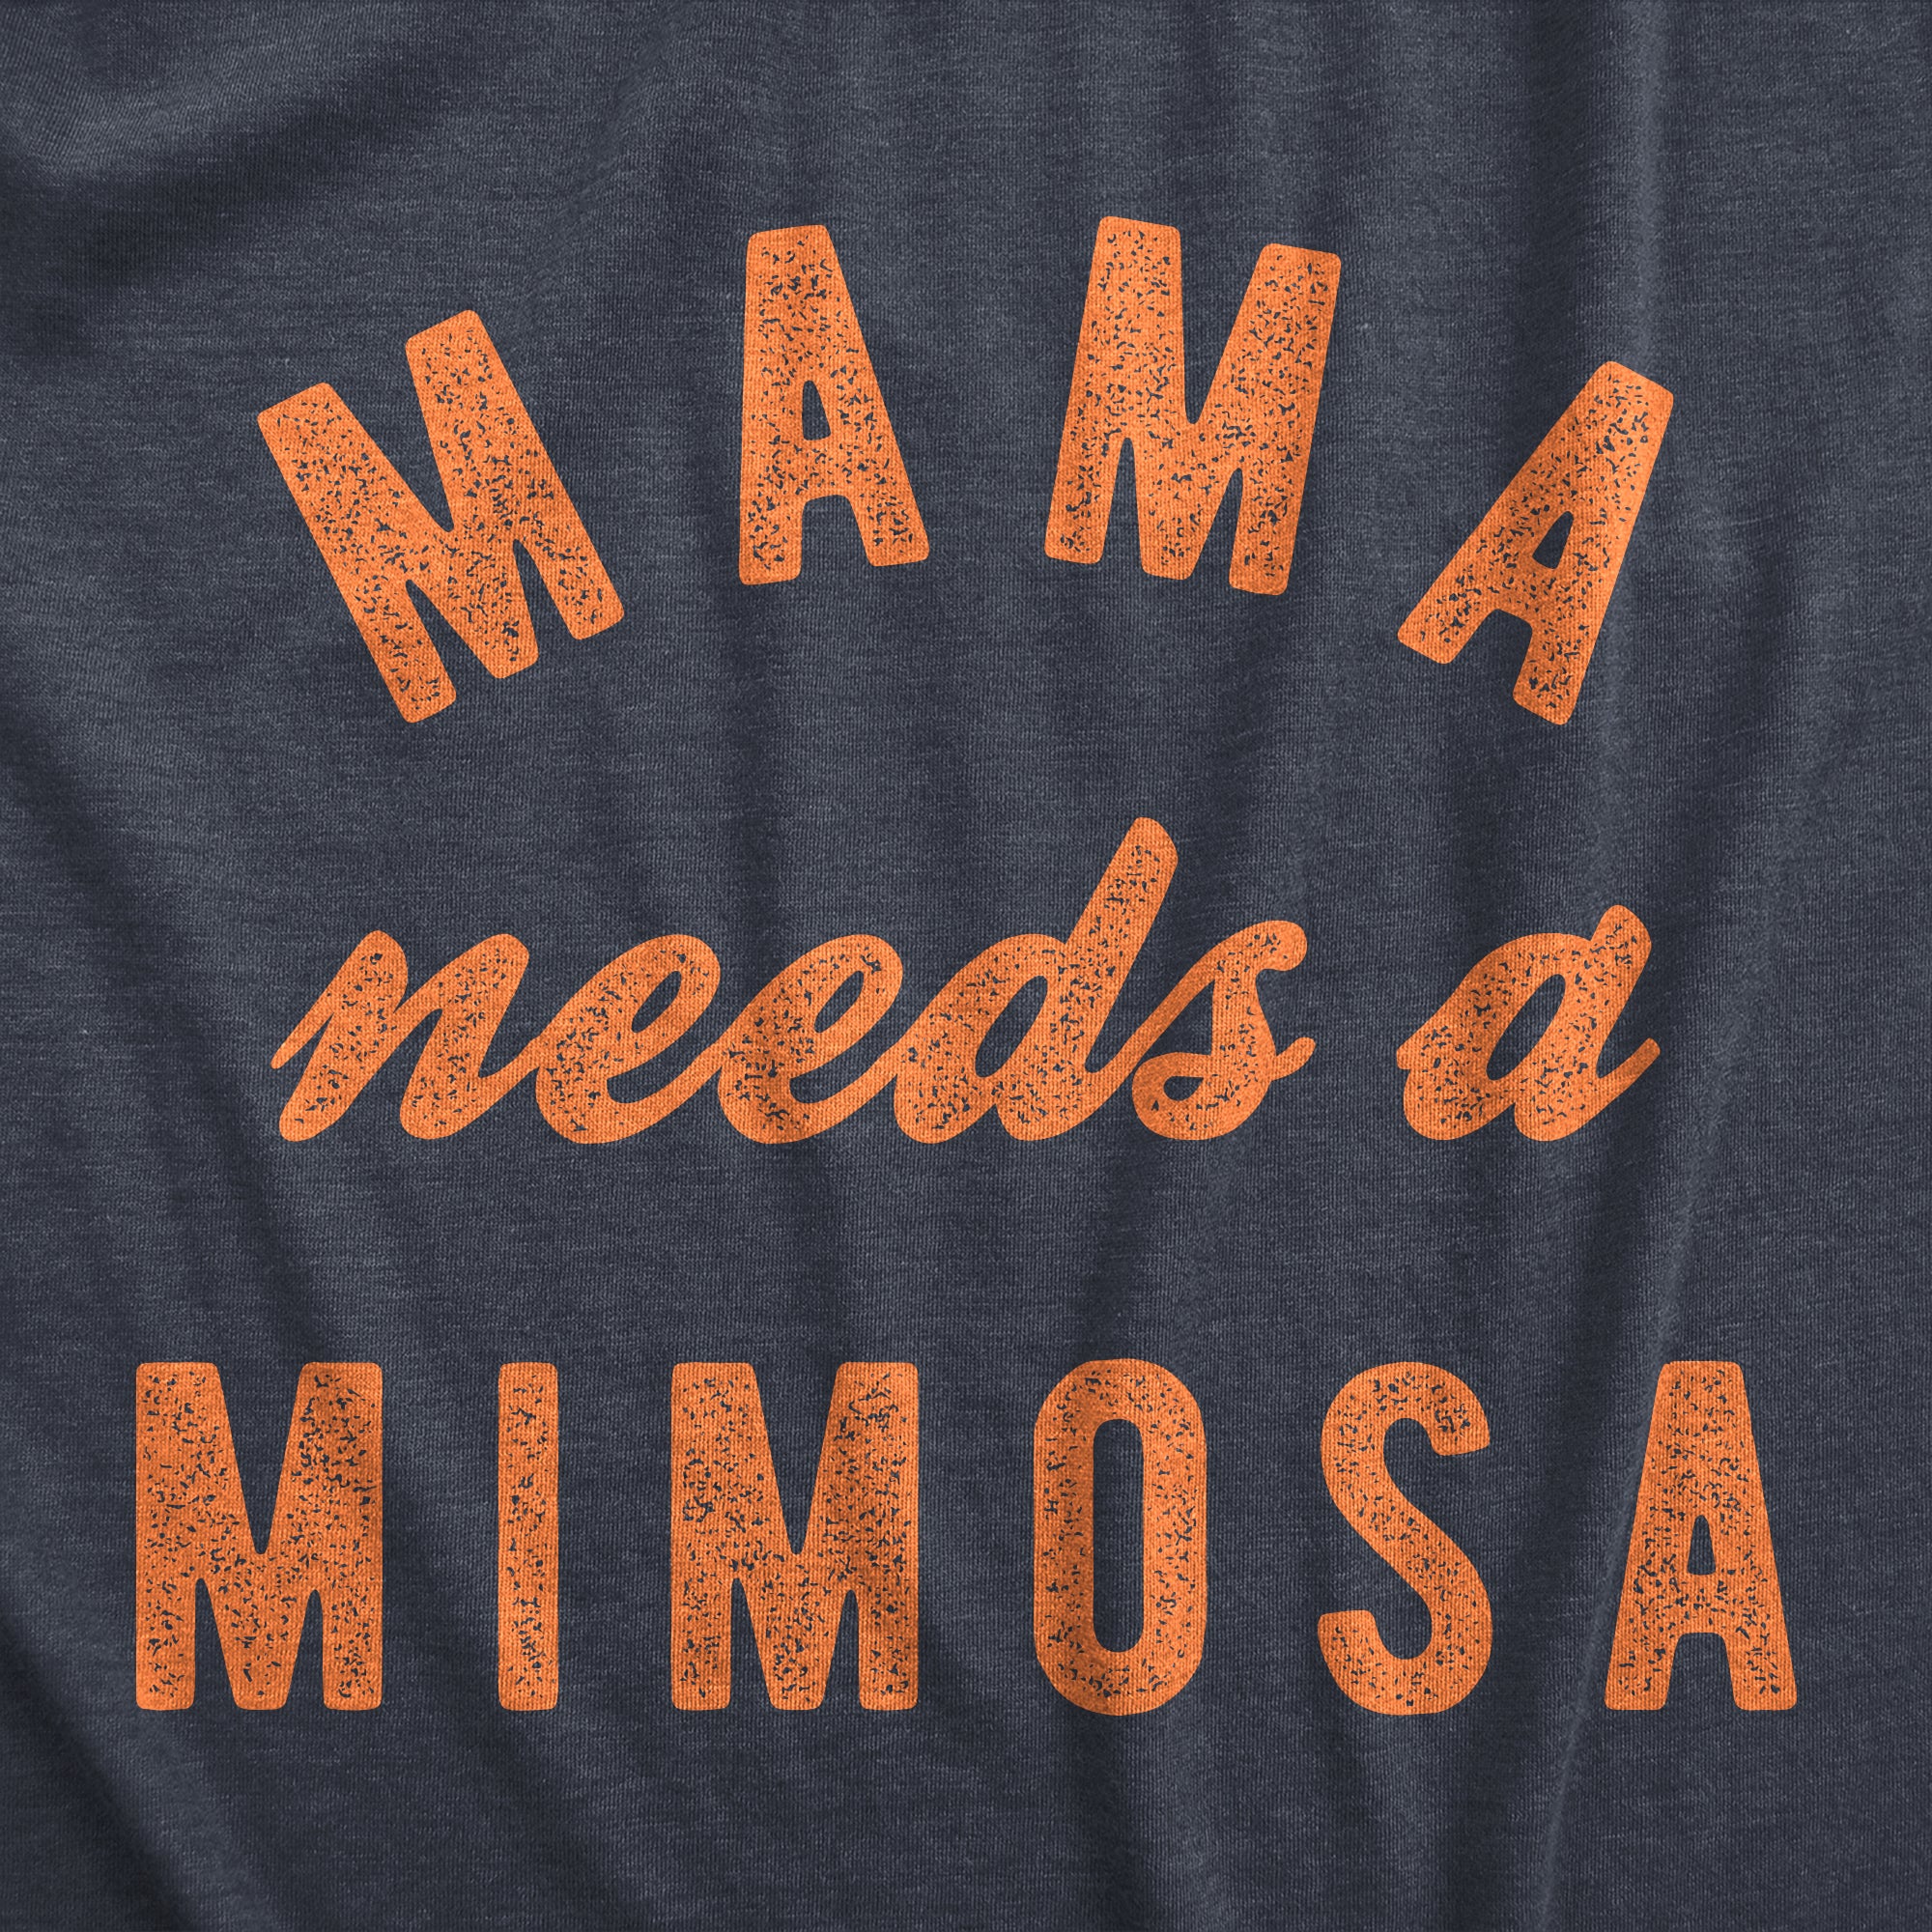 Funny Heather Navy - A Mimosa Mama Needs A Mimosa Womens T Shirt Nerdy Mother's Day Drinking Tee